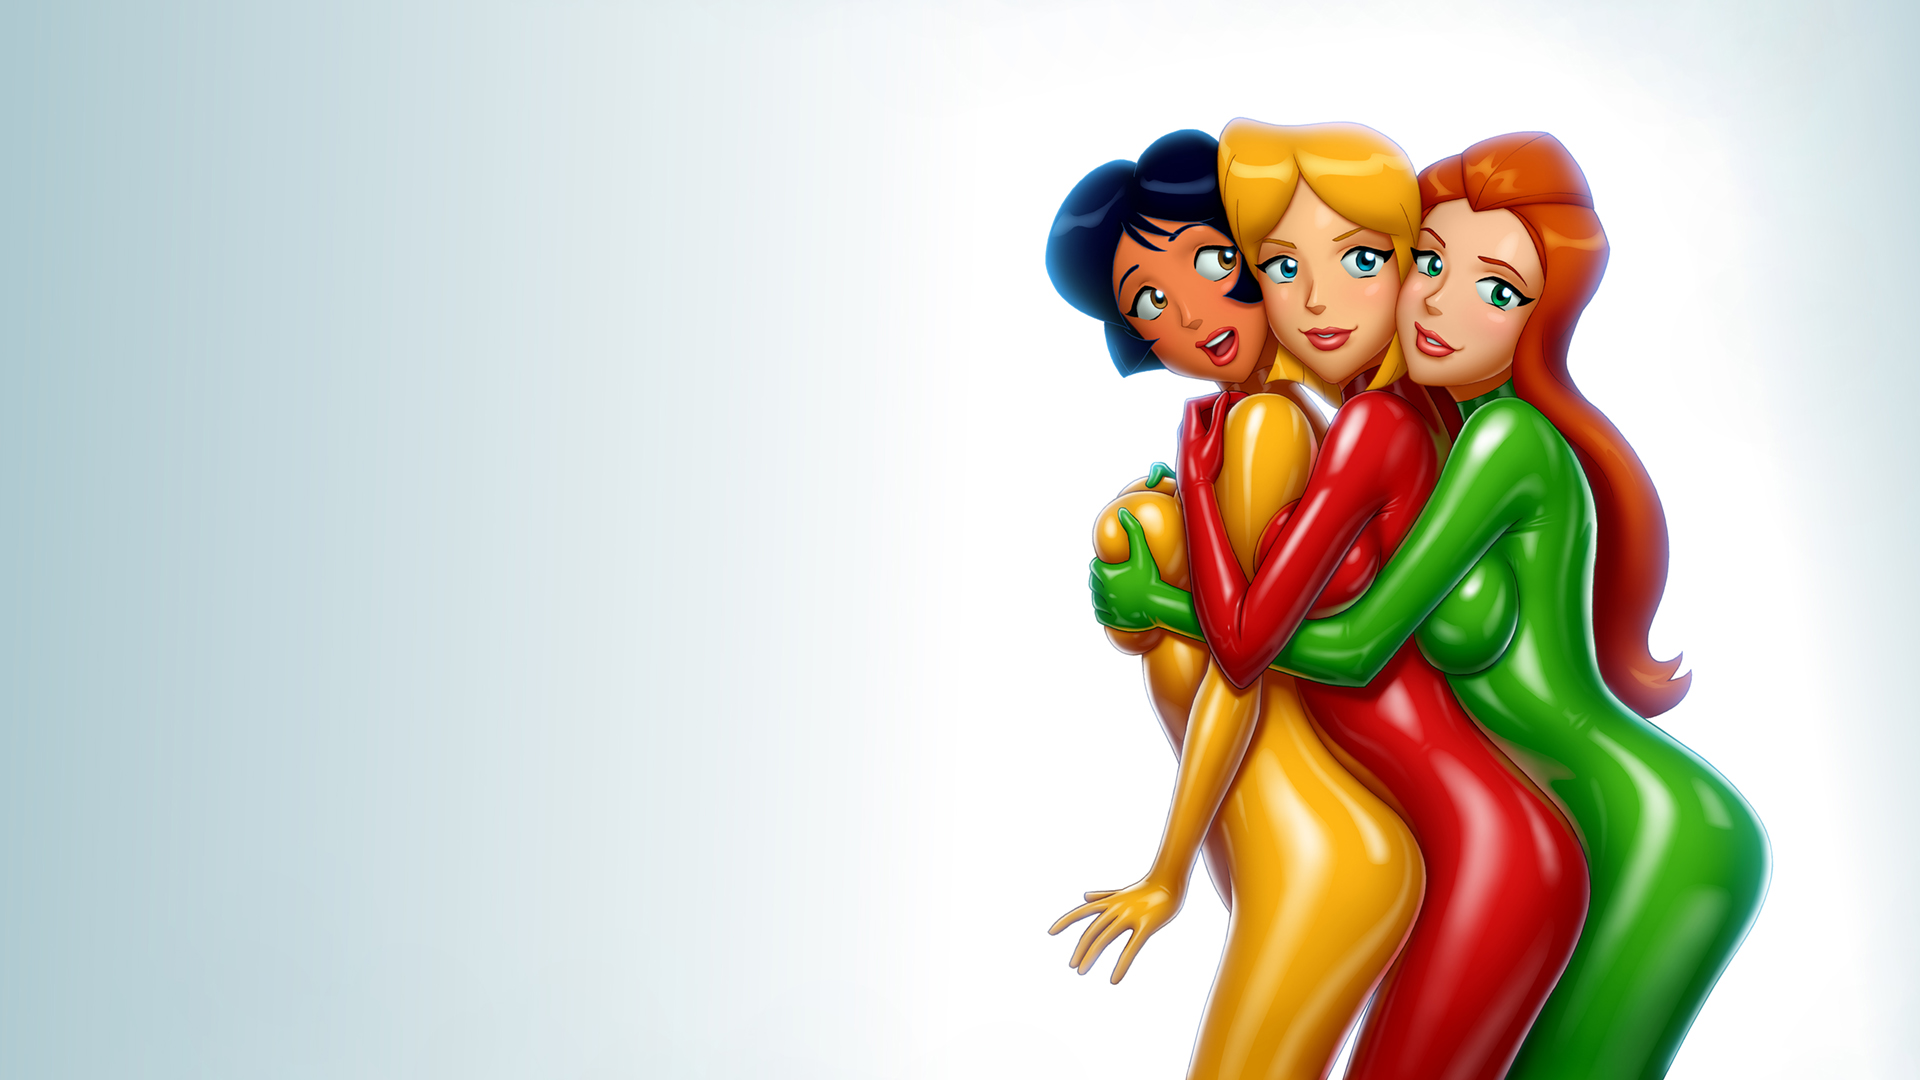 Totally Spies Image - Totally Spies Hot , HD Wallpaper & Backgrounds